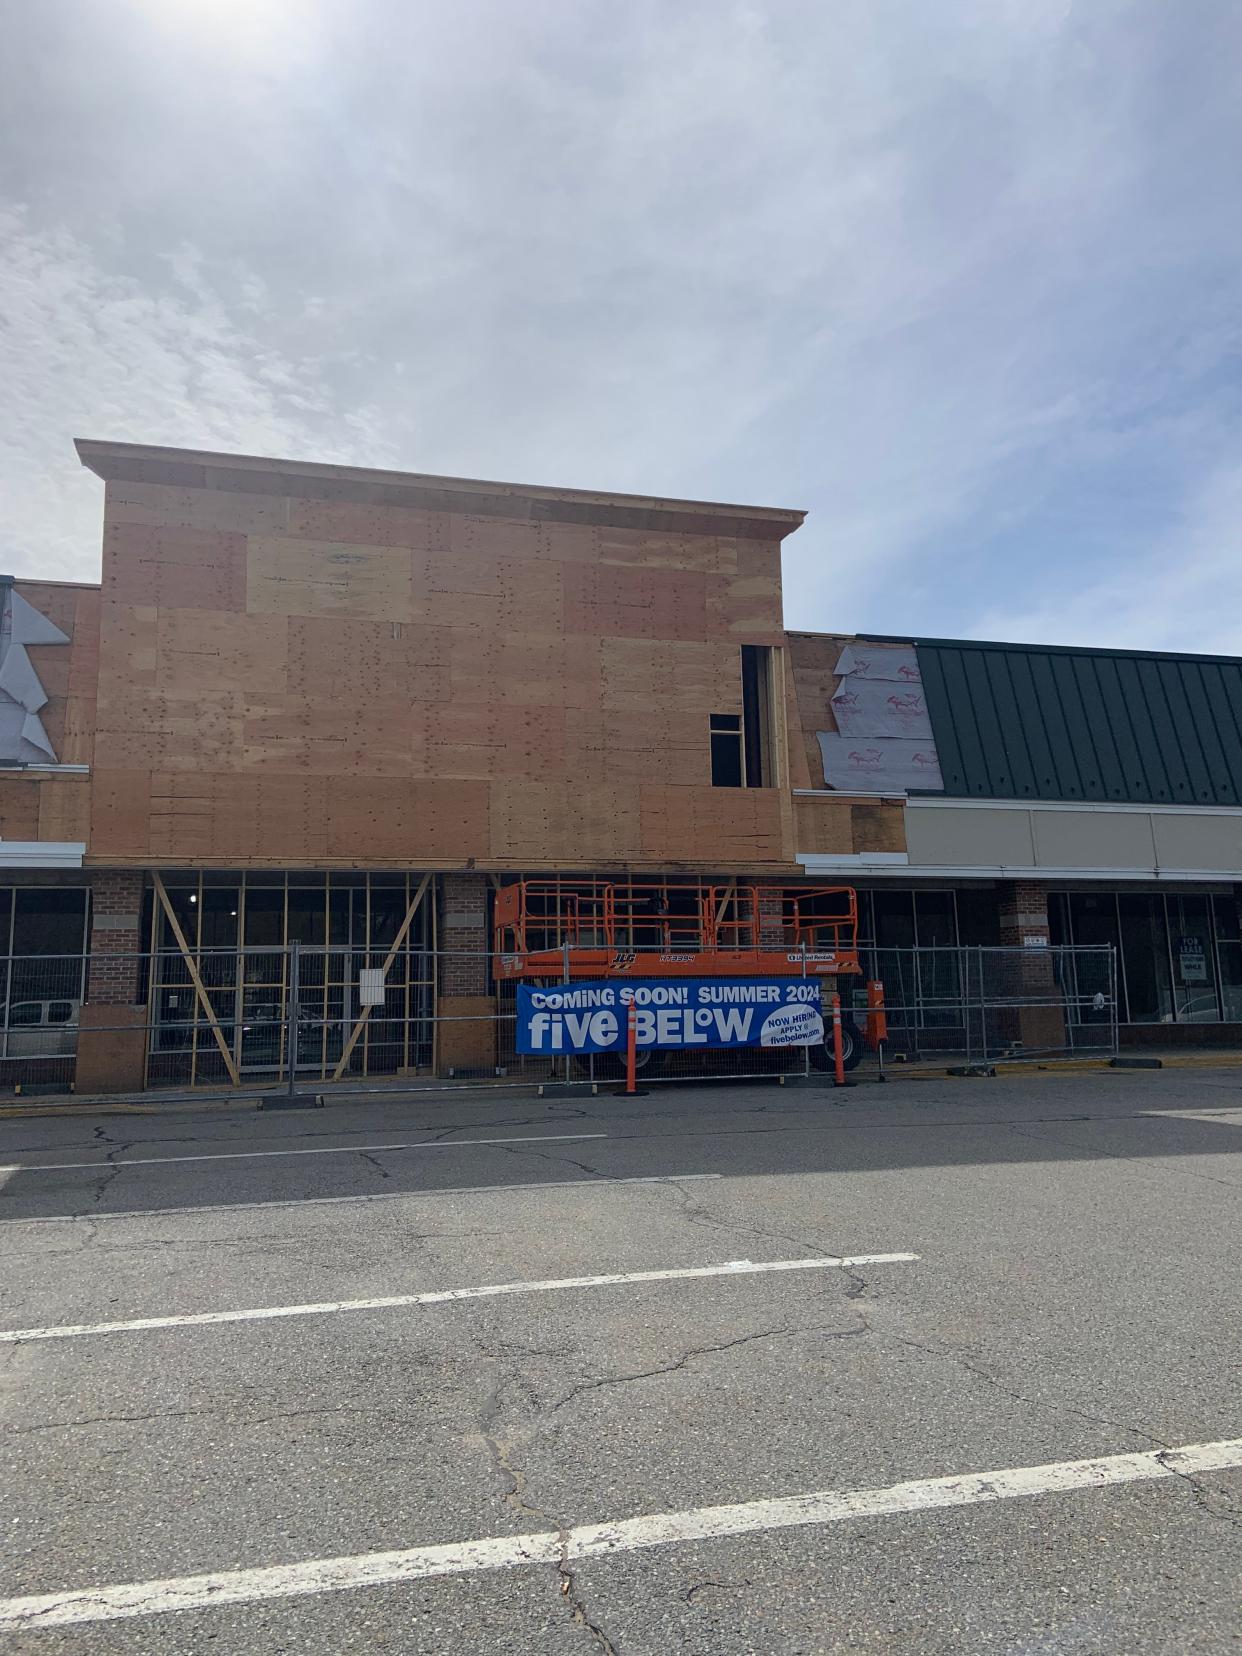 Construction continues on the Five Below store in Timpany Plaza in Gardner. The location is scheduled to open over the summer, according to a representative for the retailer.